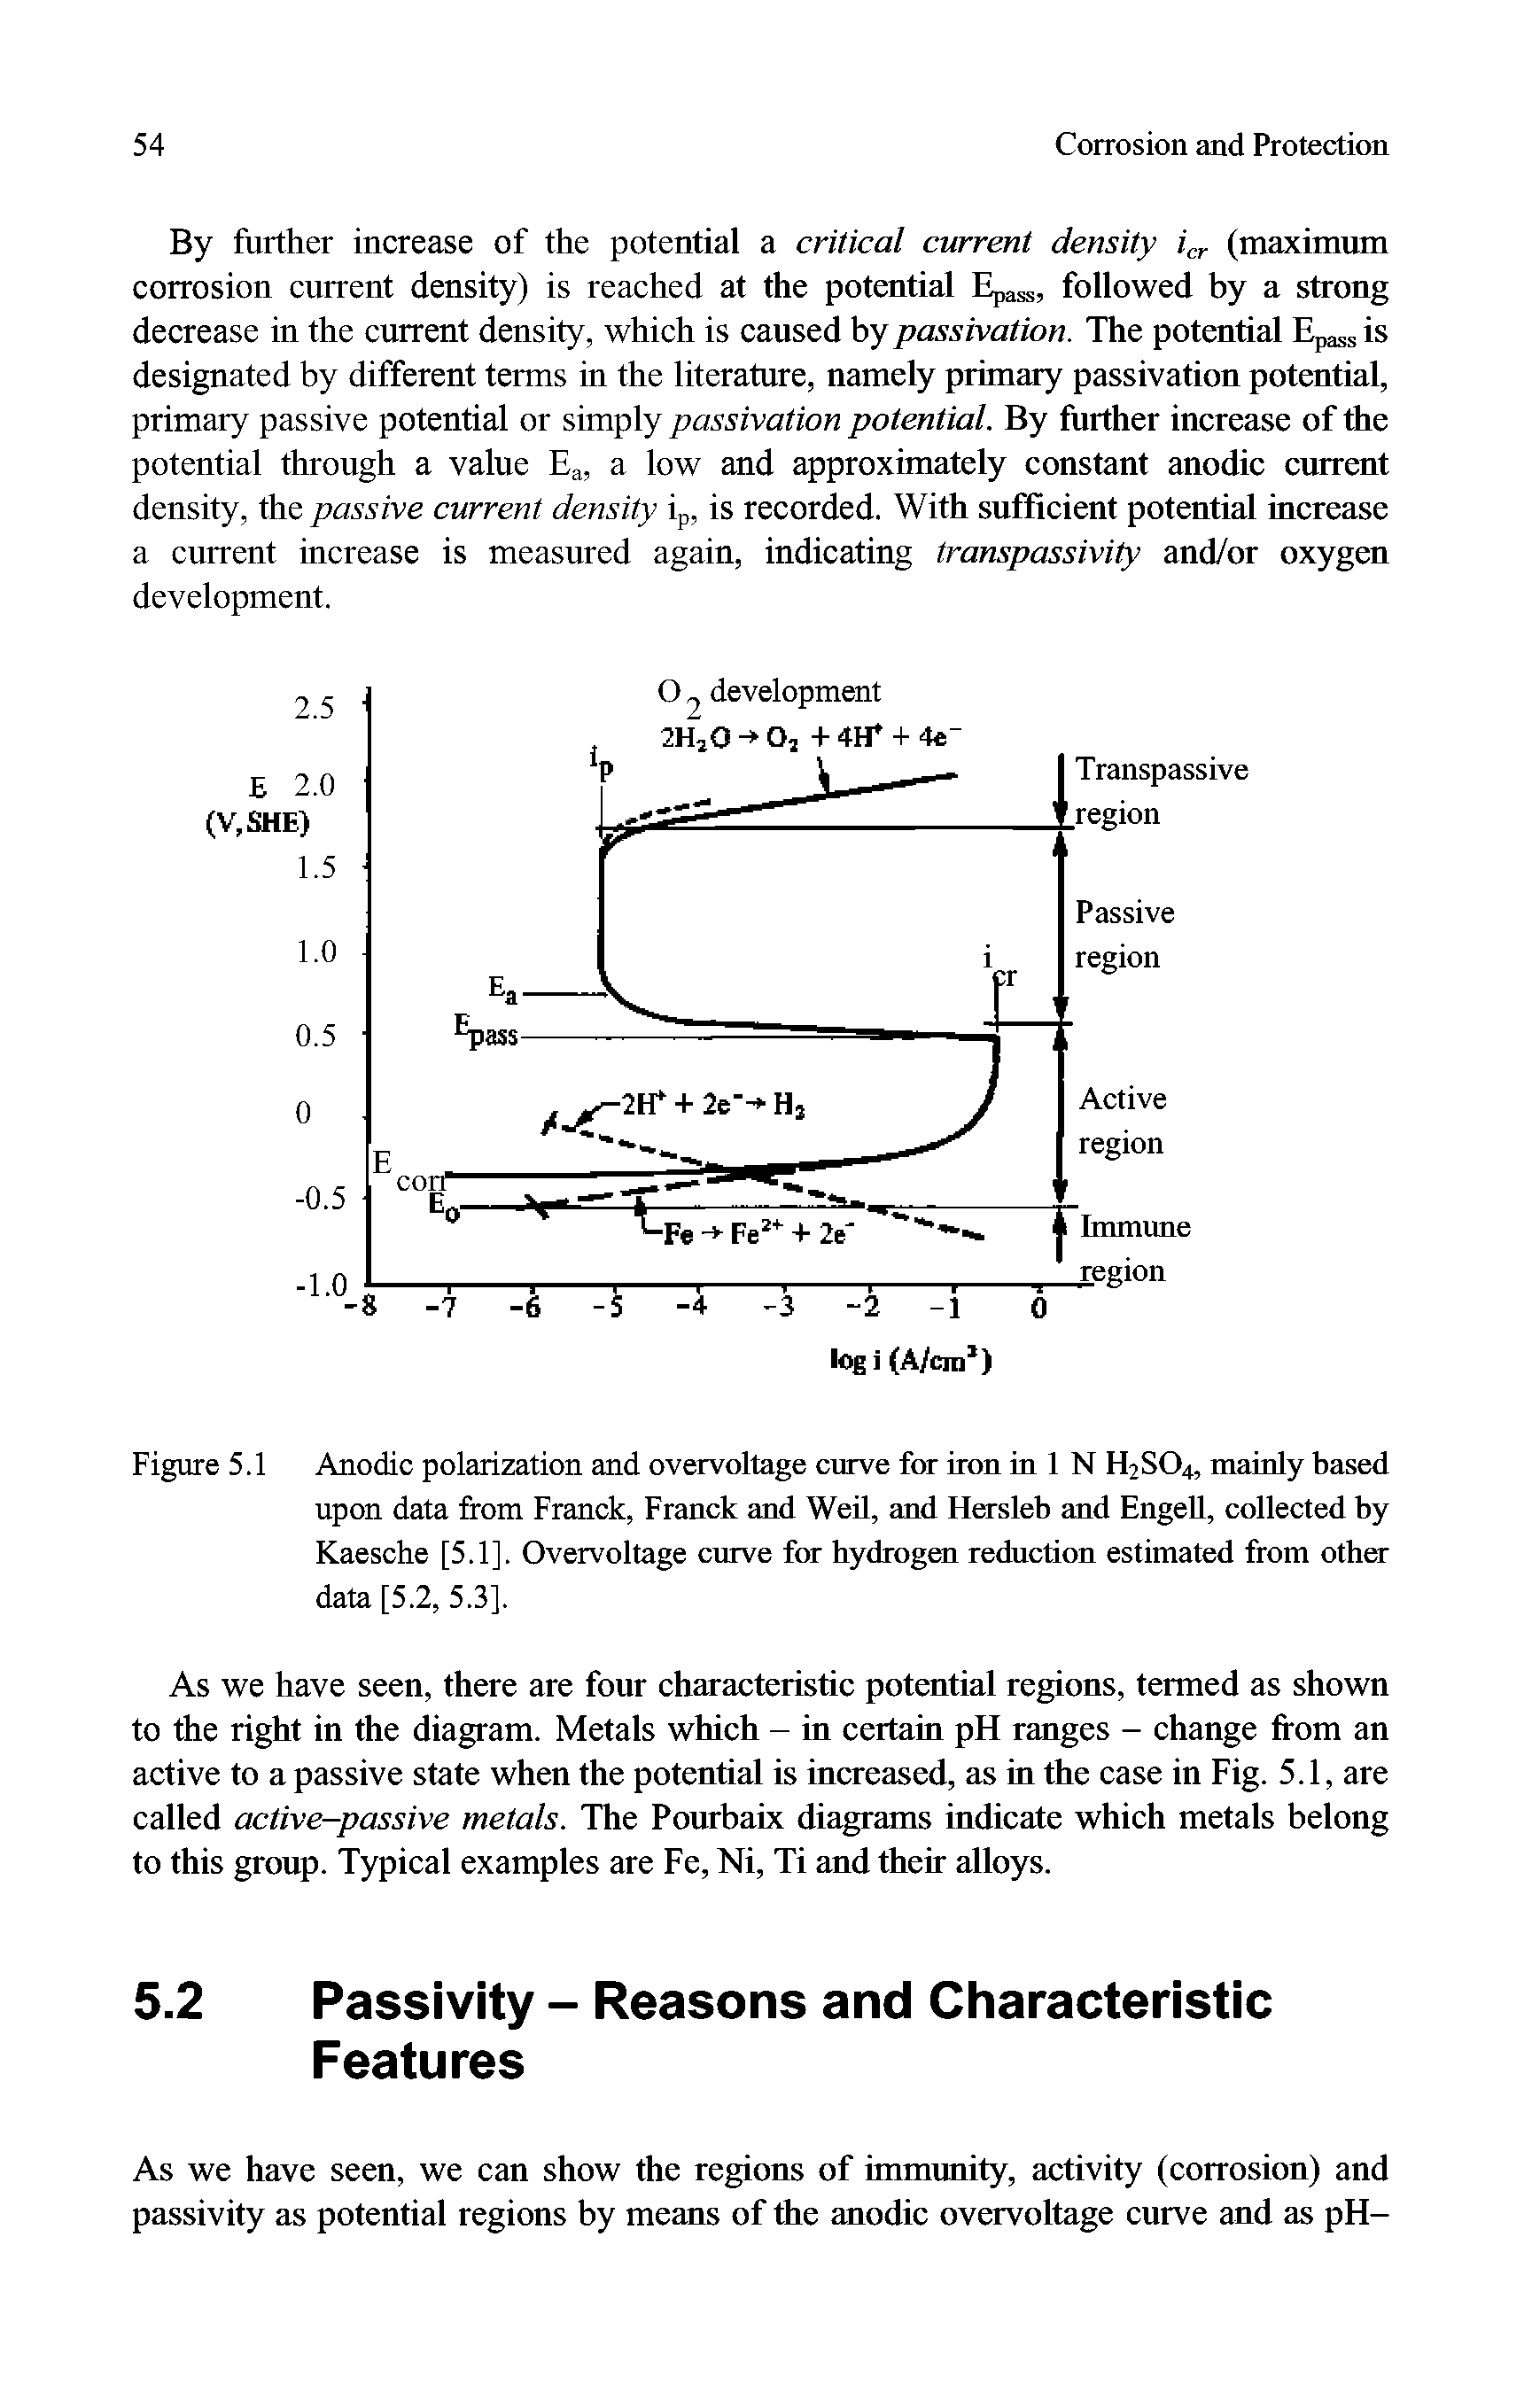 Figure 5.1 Anodic polarization and overvoltage curve for iron in 1 N H2SO4, mainly based upon data from Franck, Franck and Weil, and Hersleb and EngeU, collected by Kaesche [5.1]. Overvoltage curve for hydrogen reduction estimated from other data [5.2, 5.3].